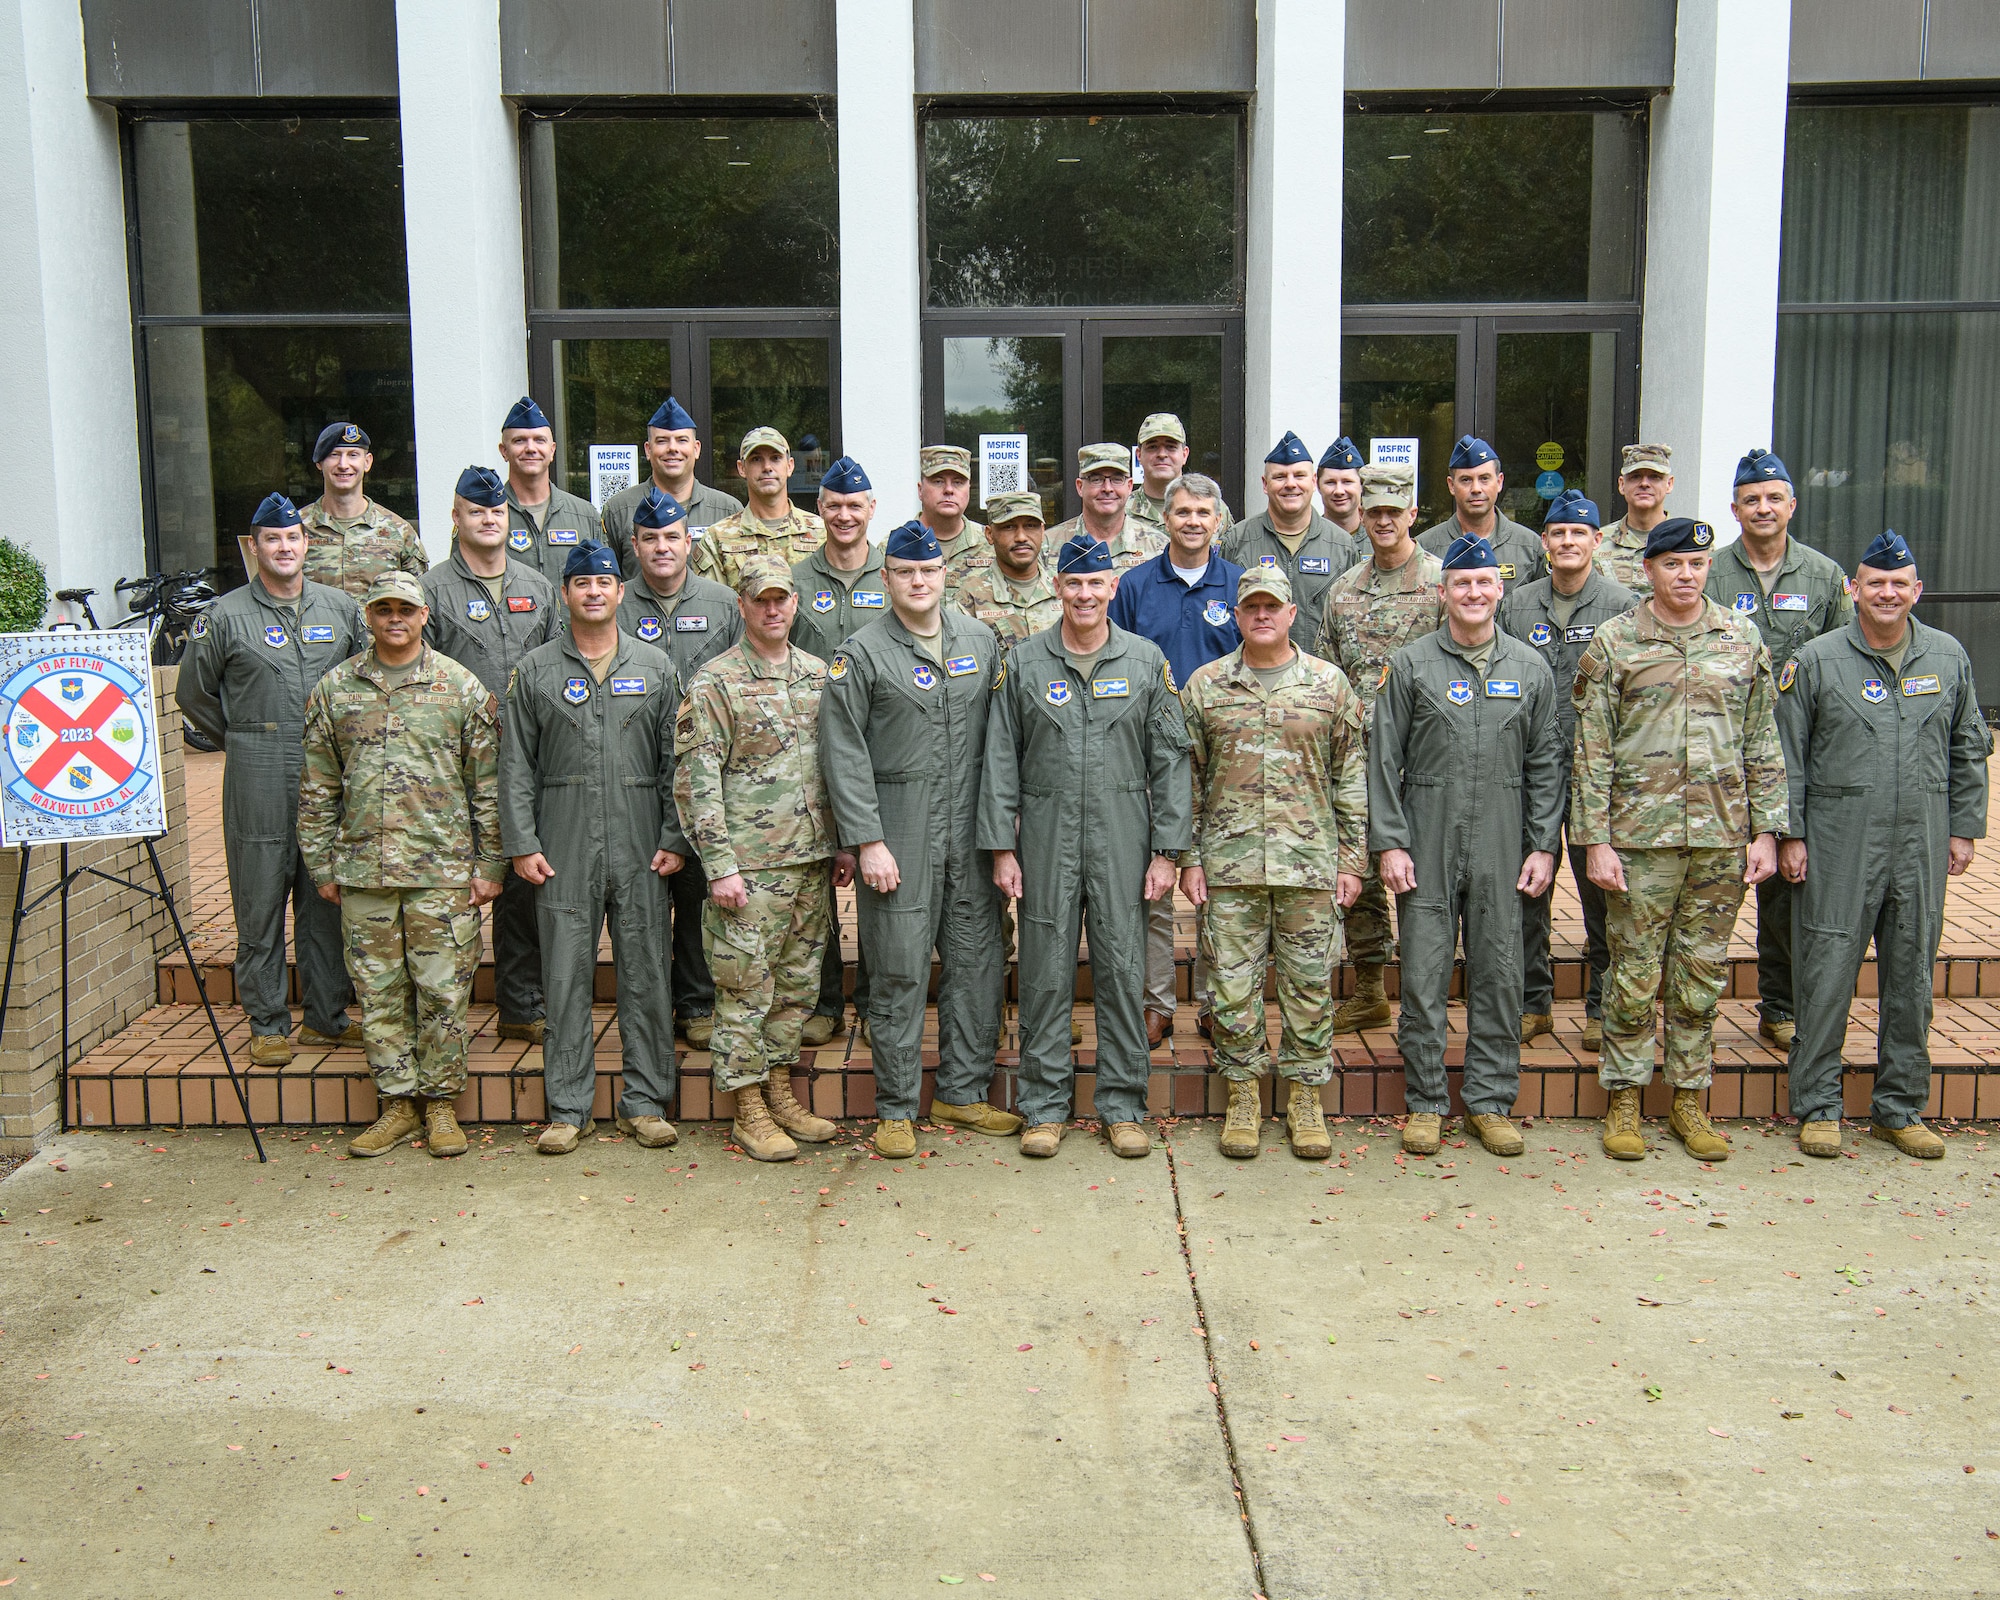 Military members taking a group photo for 19th AF fly-in